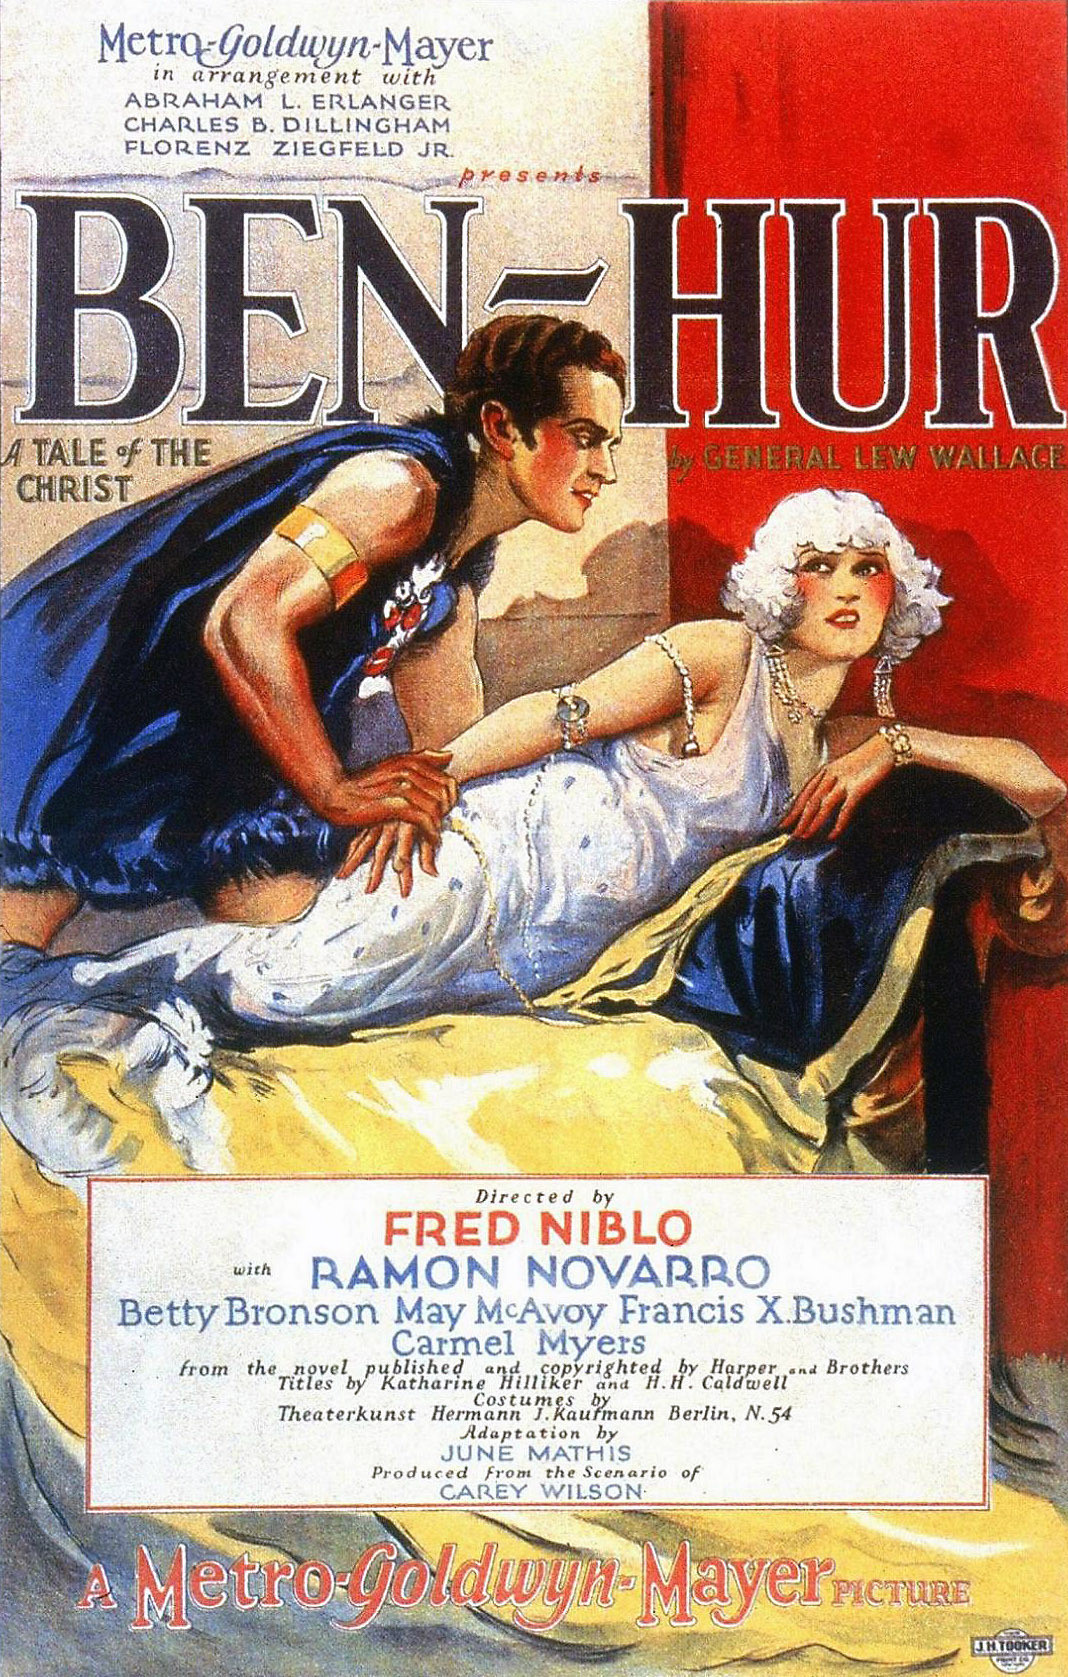 Poster for the movie "Ben-Hur: A Tale of the Christ"